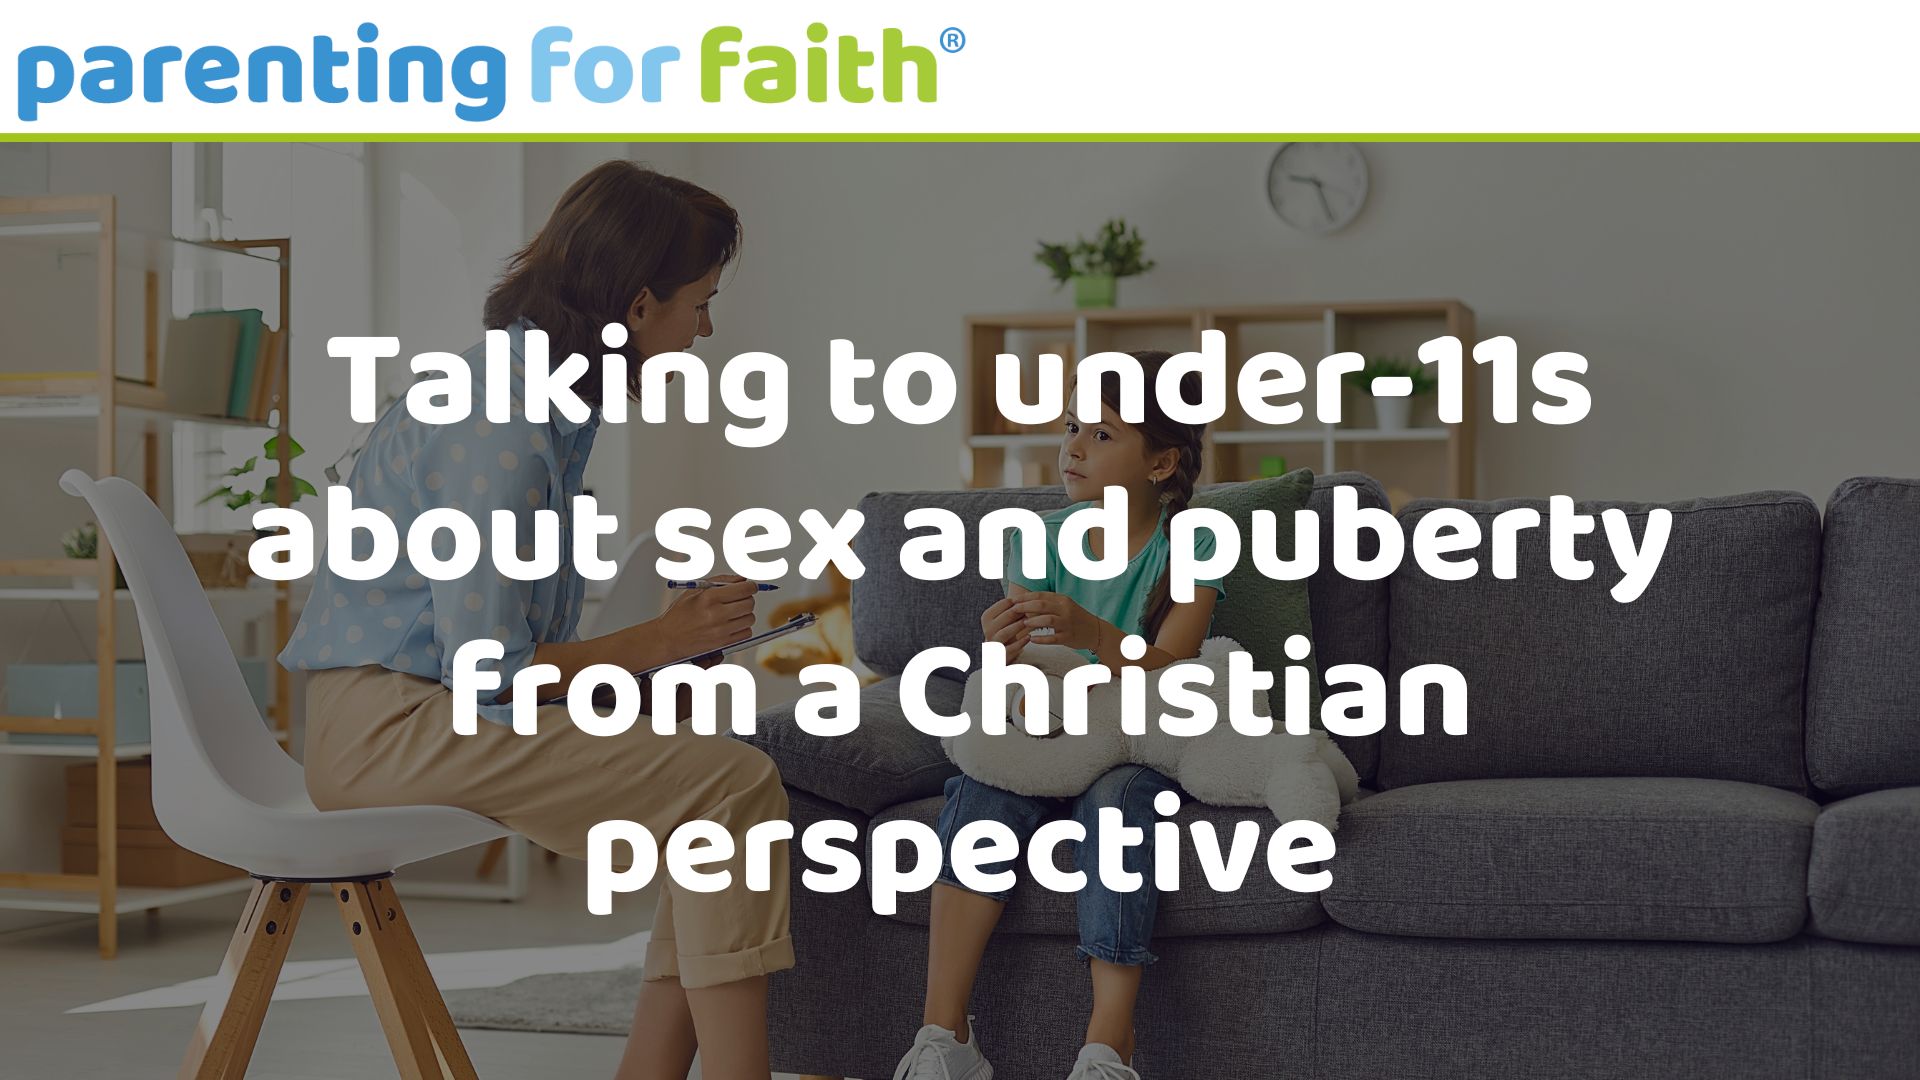 Talking to under s about sex and puberty from a Christian perspective image credit studioroman